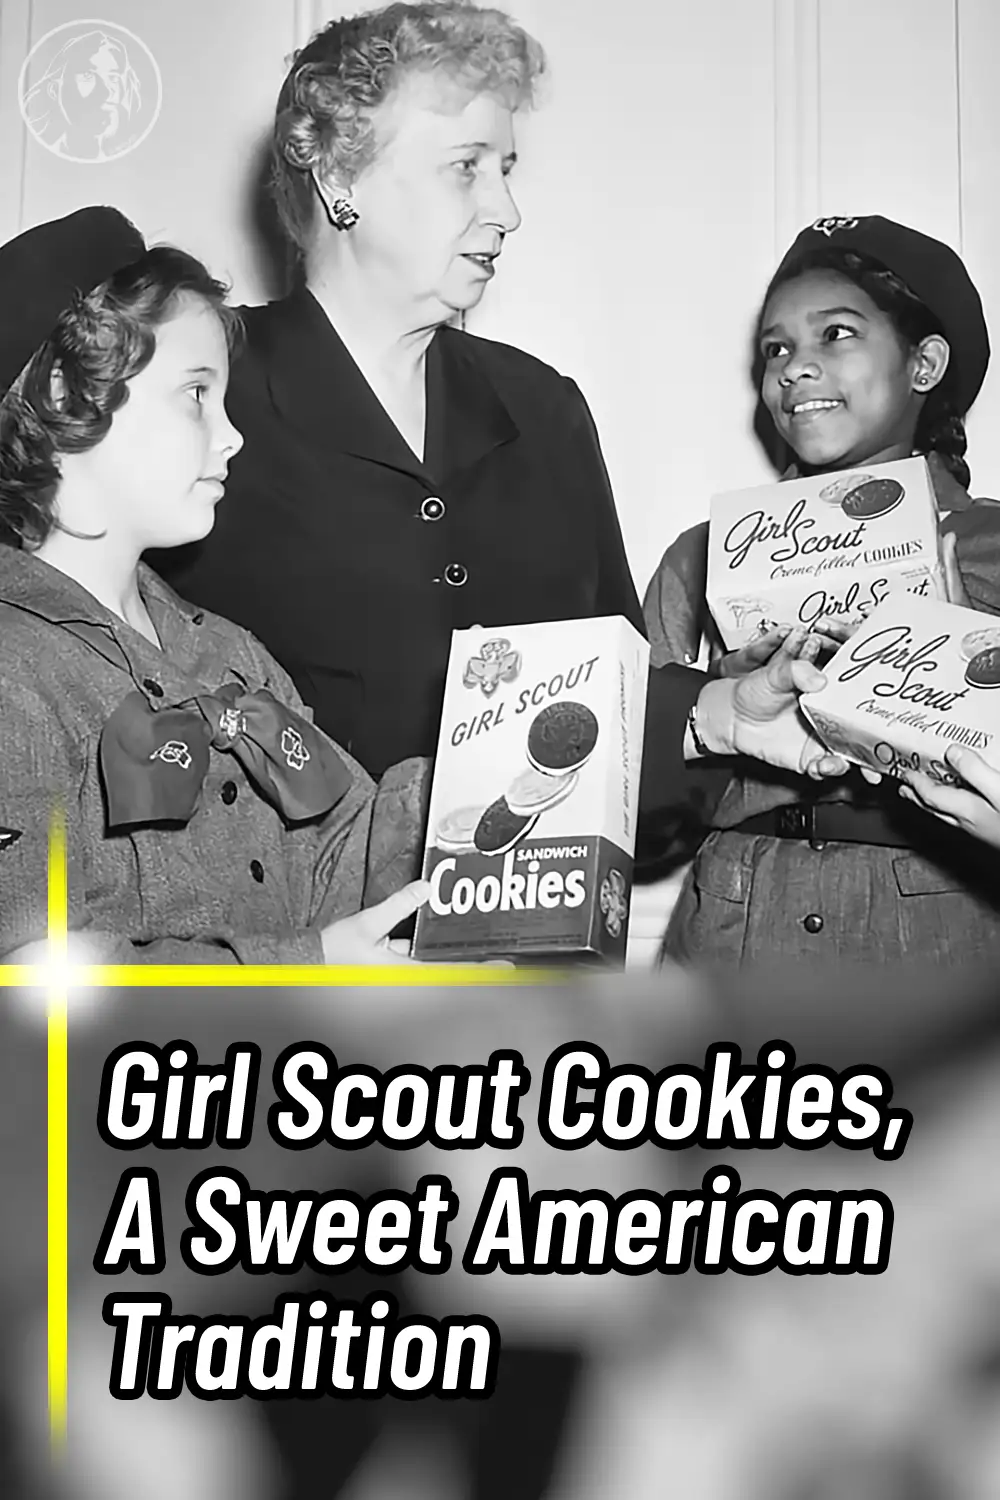 Girl Scout Cookies, A Sweet American Tradition